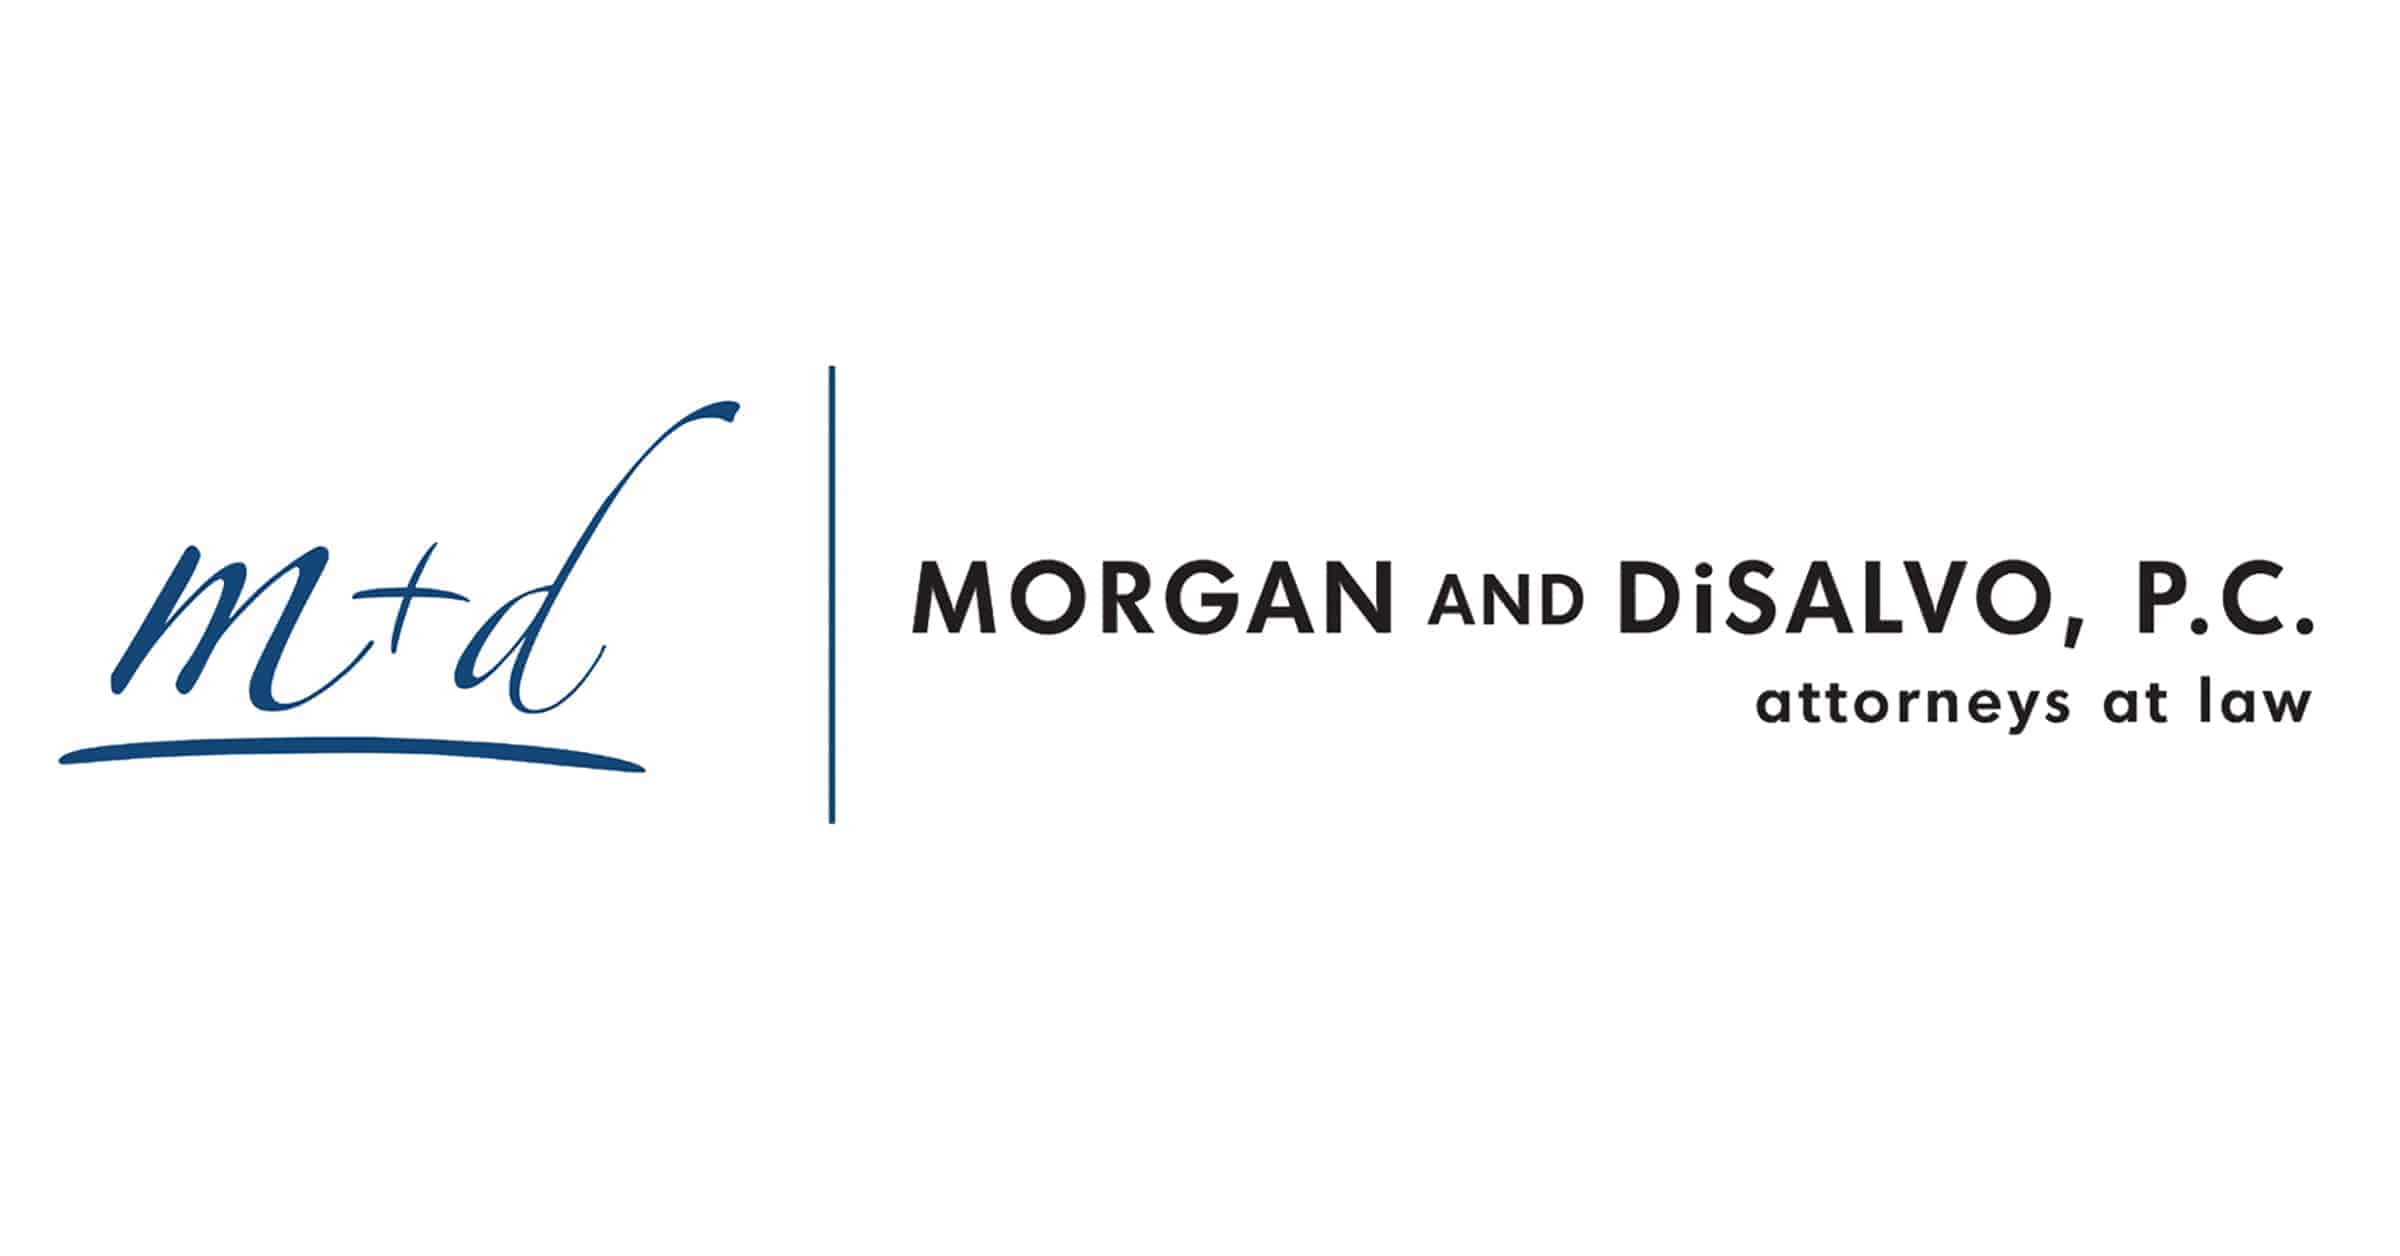 Morgan and DiSalvo, P.C. | Attorneys at Law